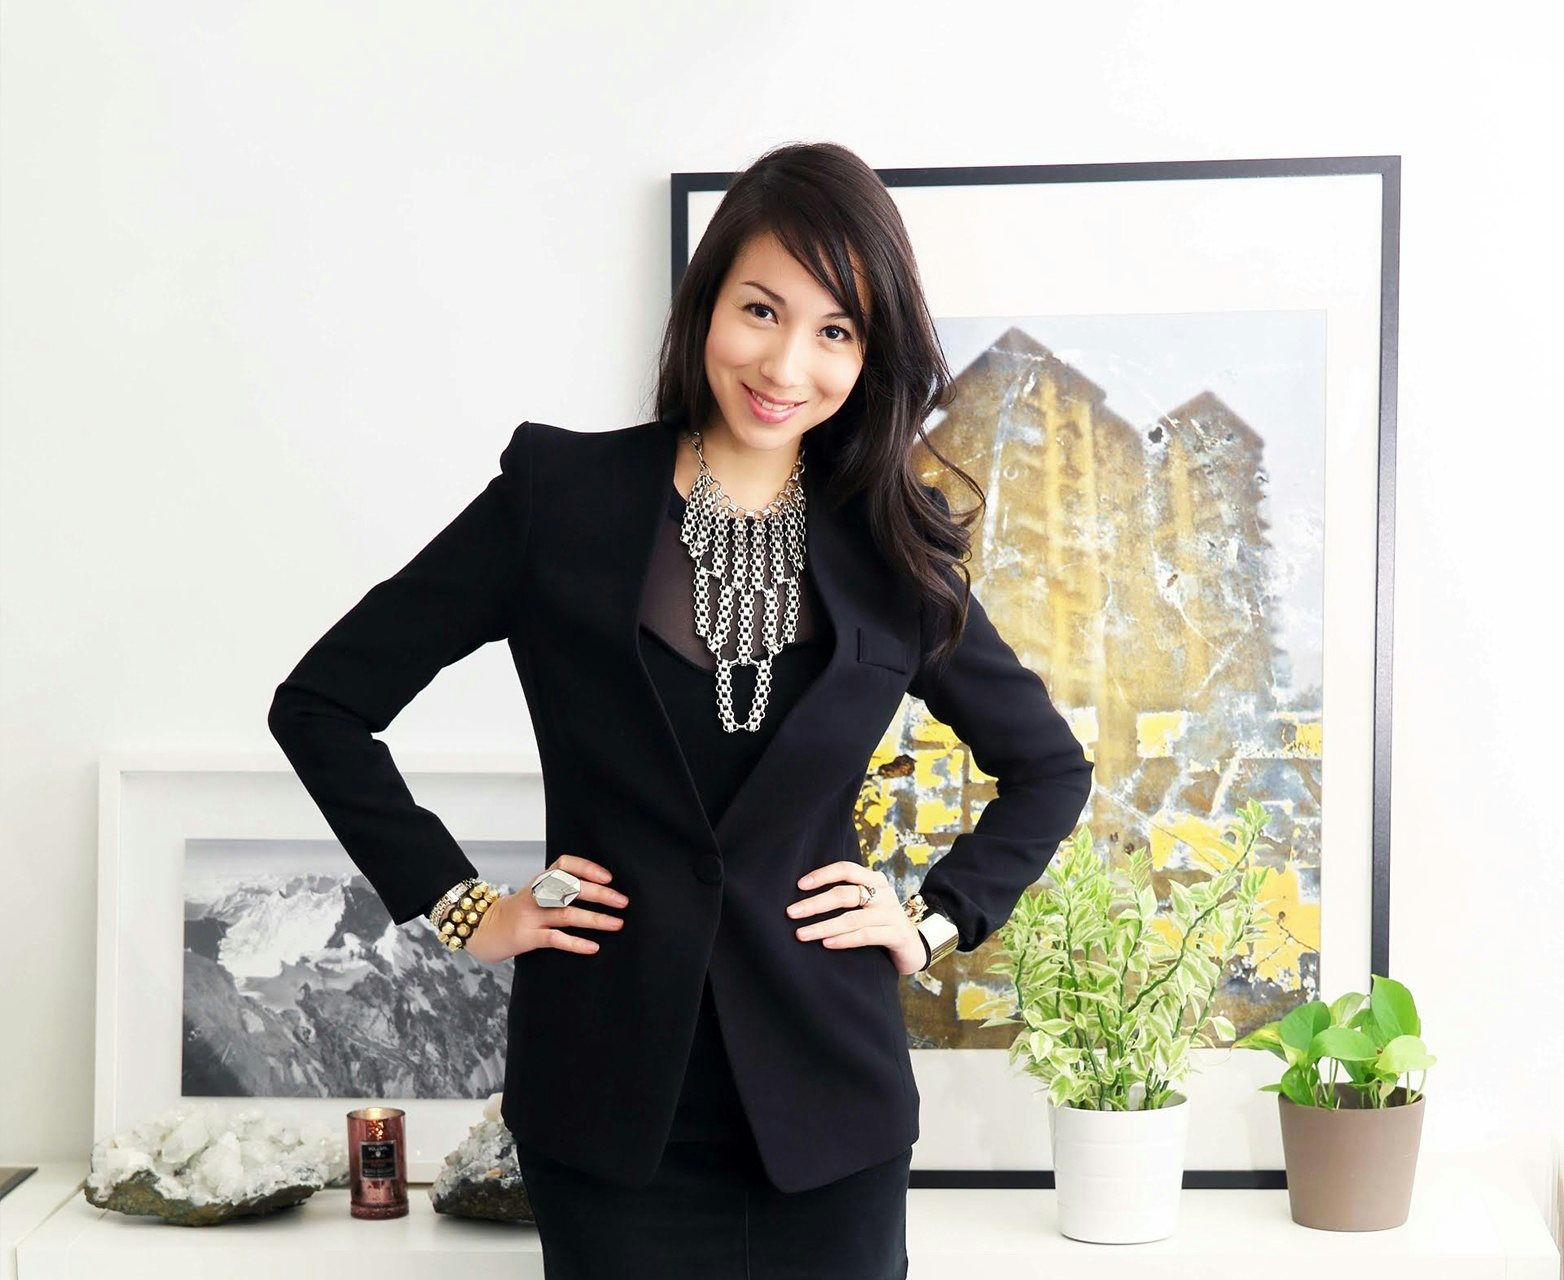 Talenia Phua Gajardo, CEO & founder of Luxglove & TheArtling in Singapore will be giving a talk at the first Art x Lux Conference on August 15.